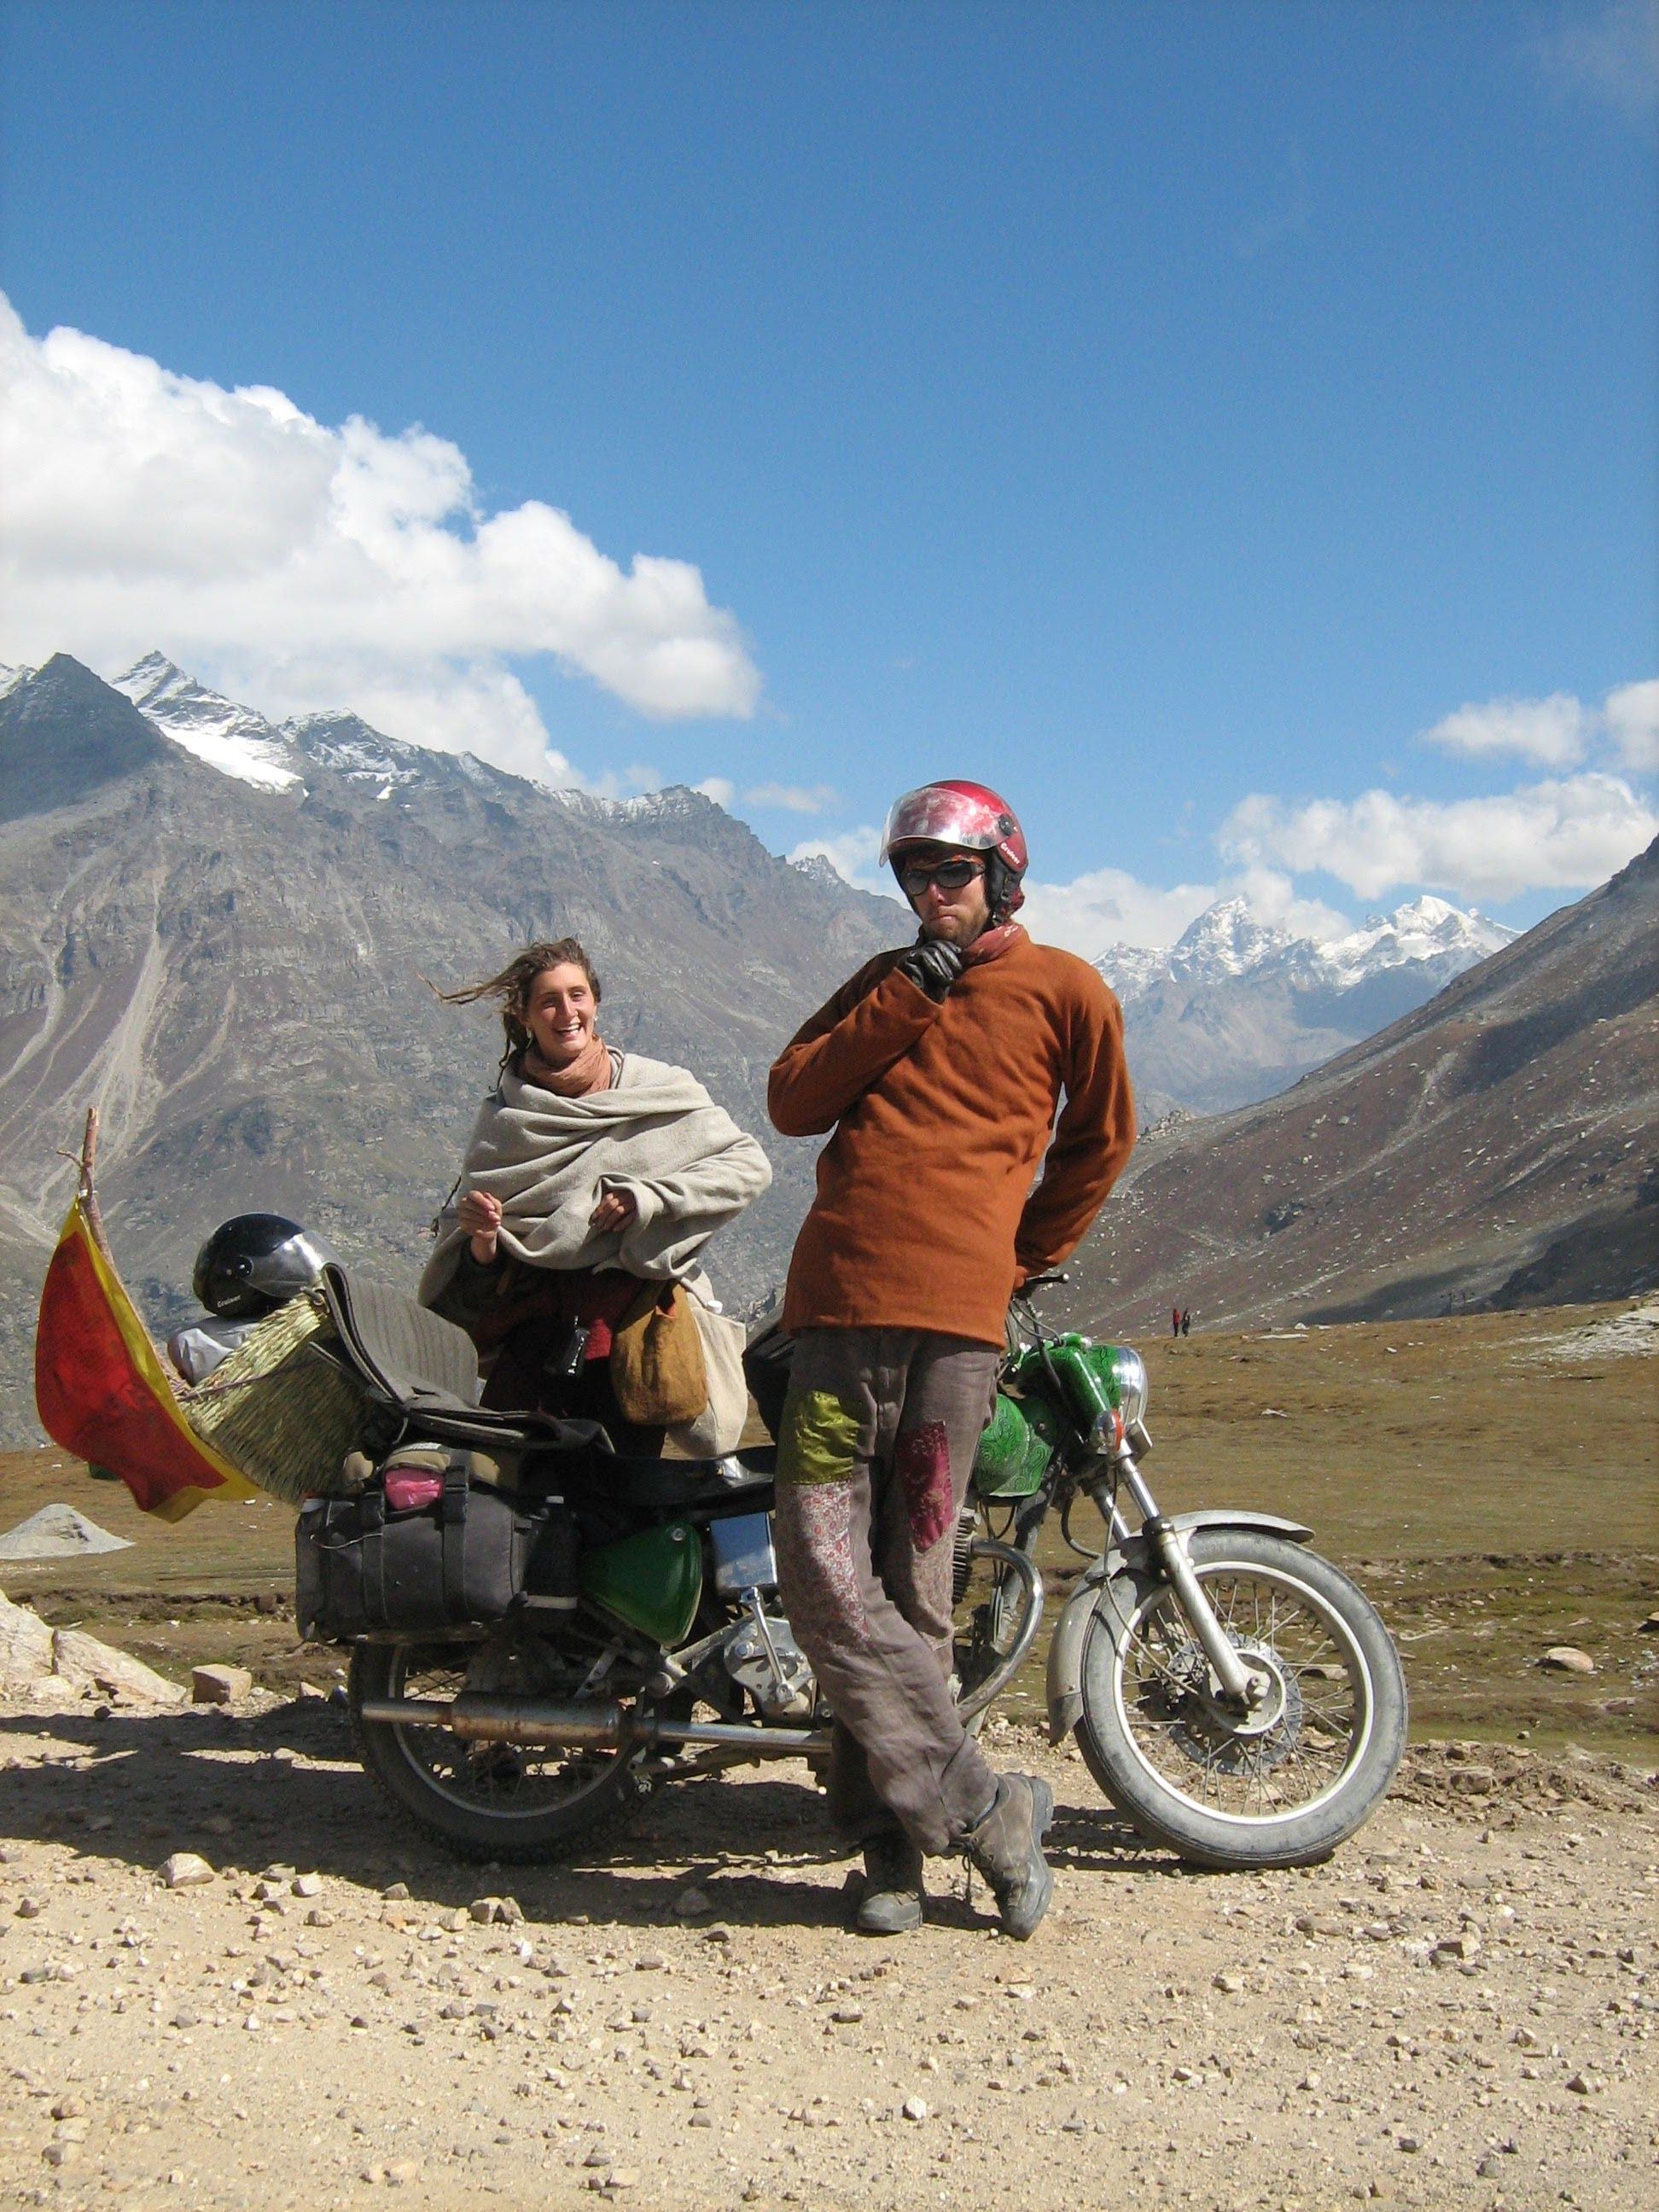 A man wearing an orange wool jacket and grey pants stands with a woman wearing a white blanket next to a green motorcycle, high on a mountain pass in the Himalayas. Snow capped peaks surround them. 